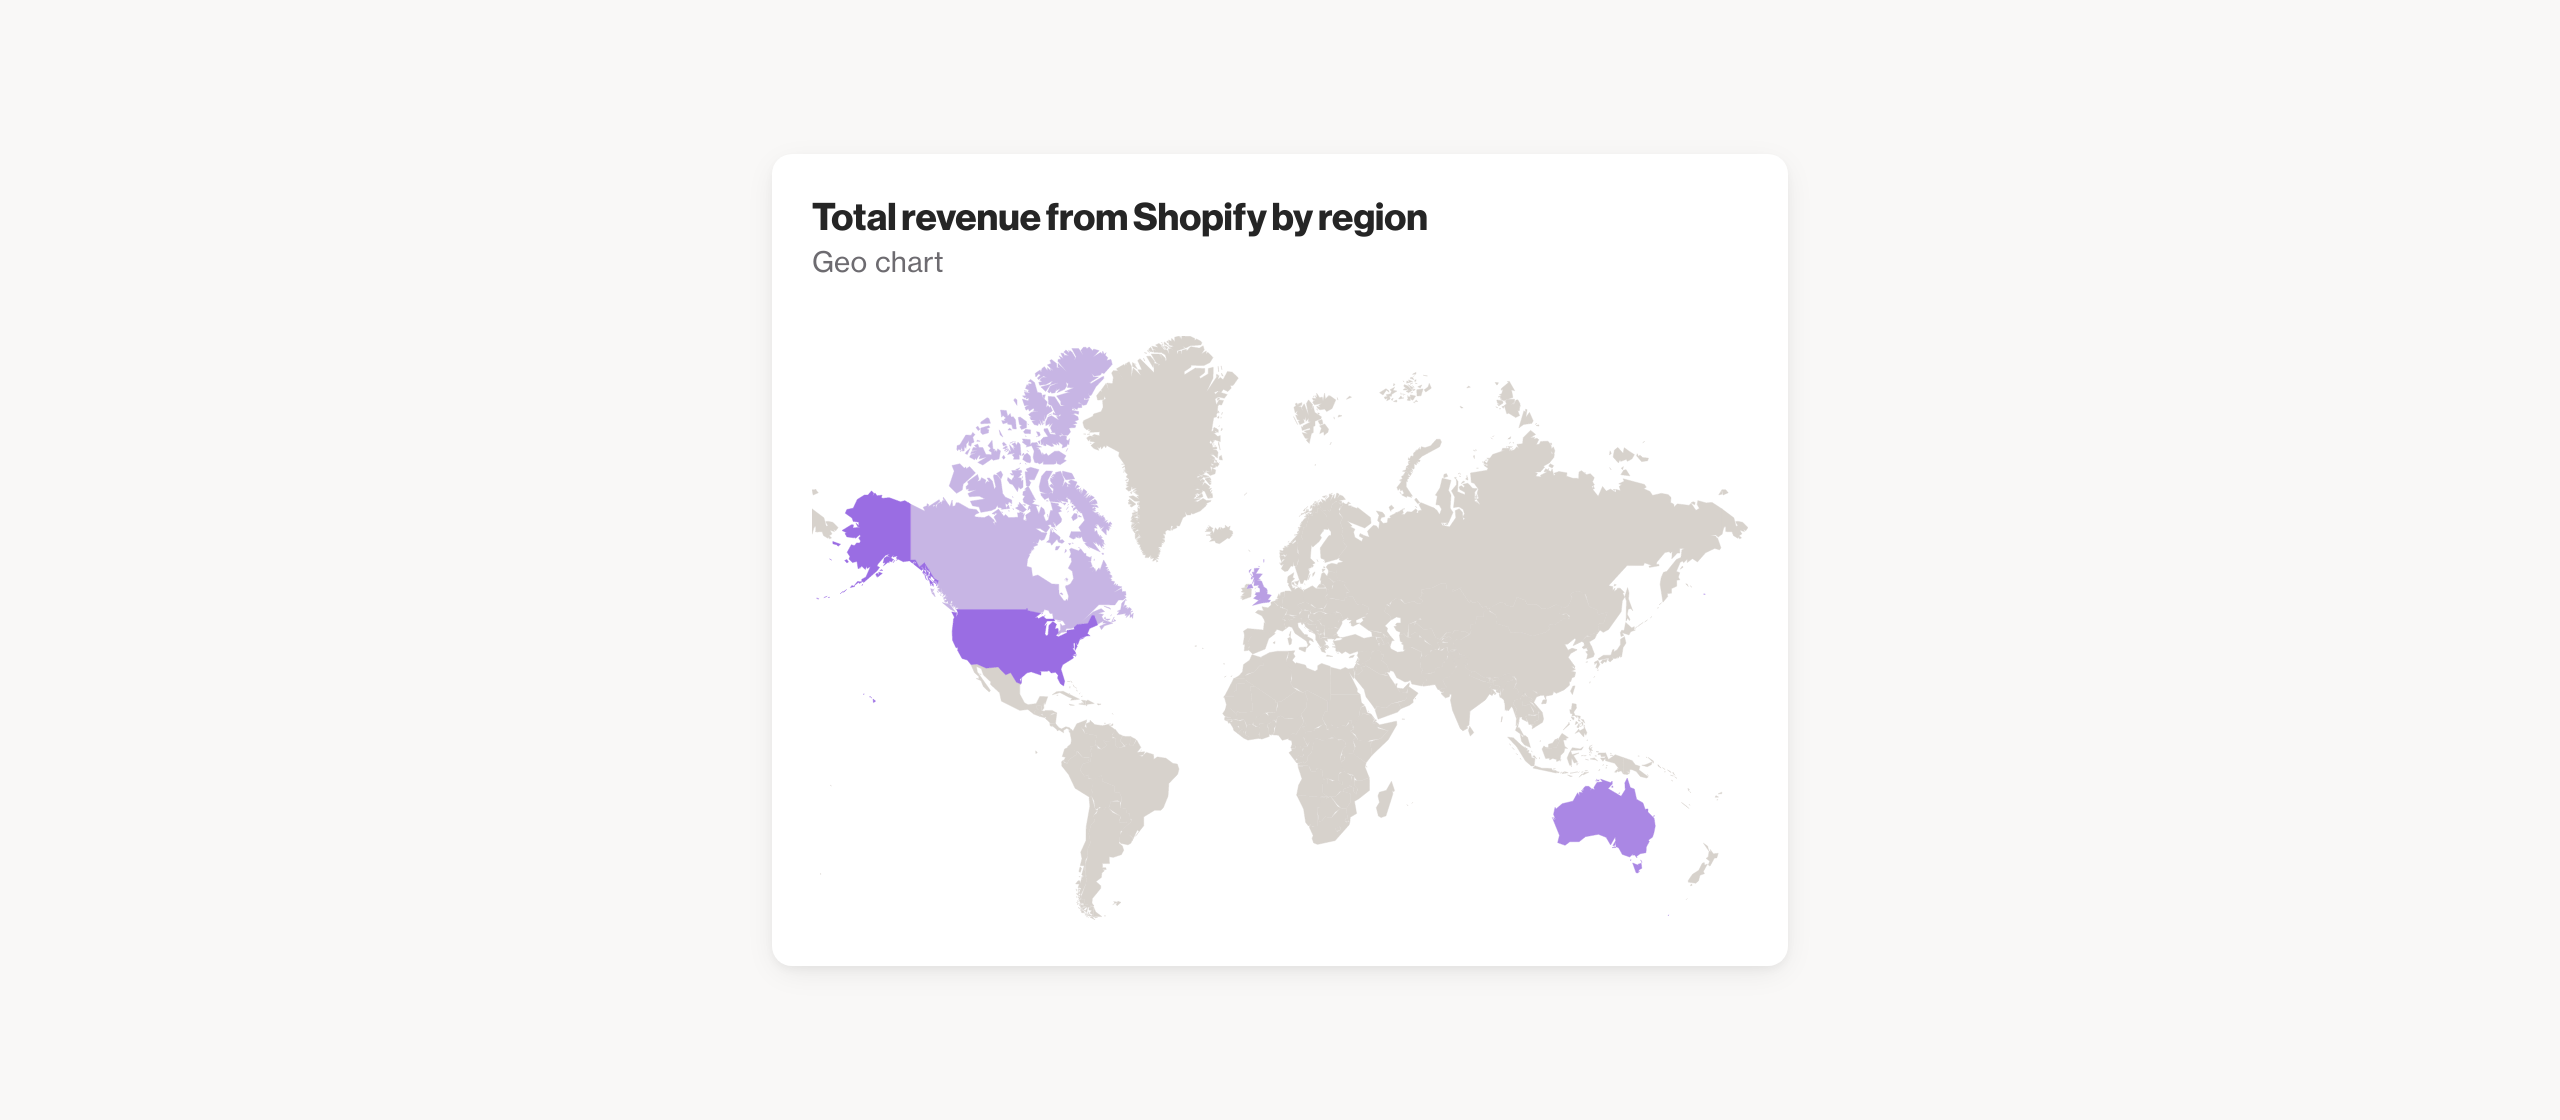 Total revenue from Shopify by region